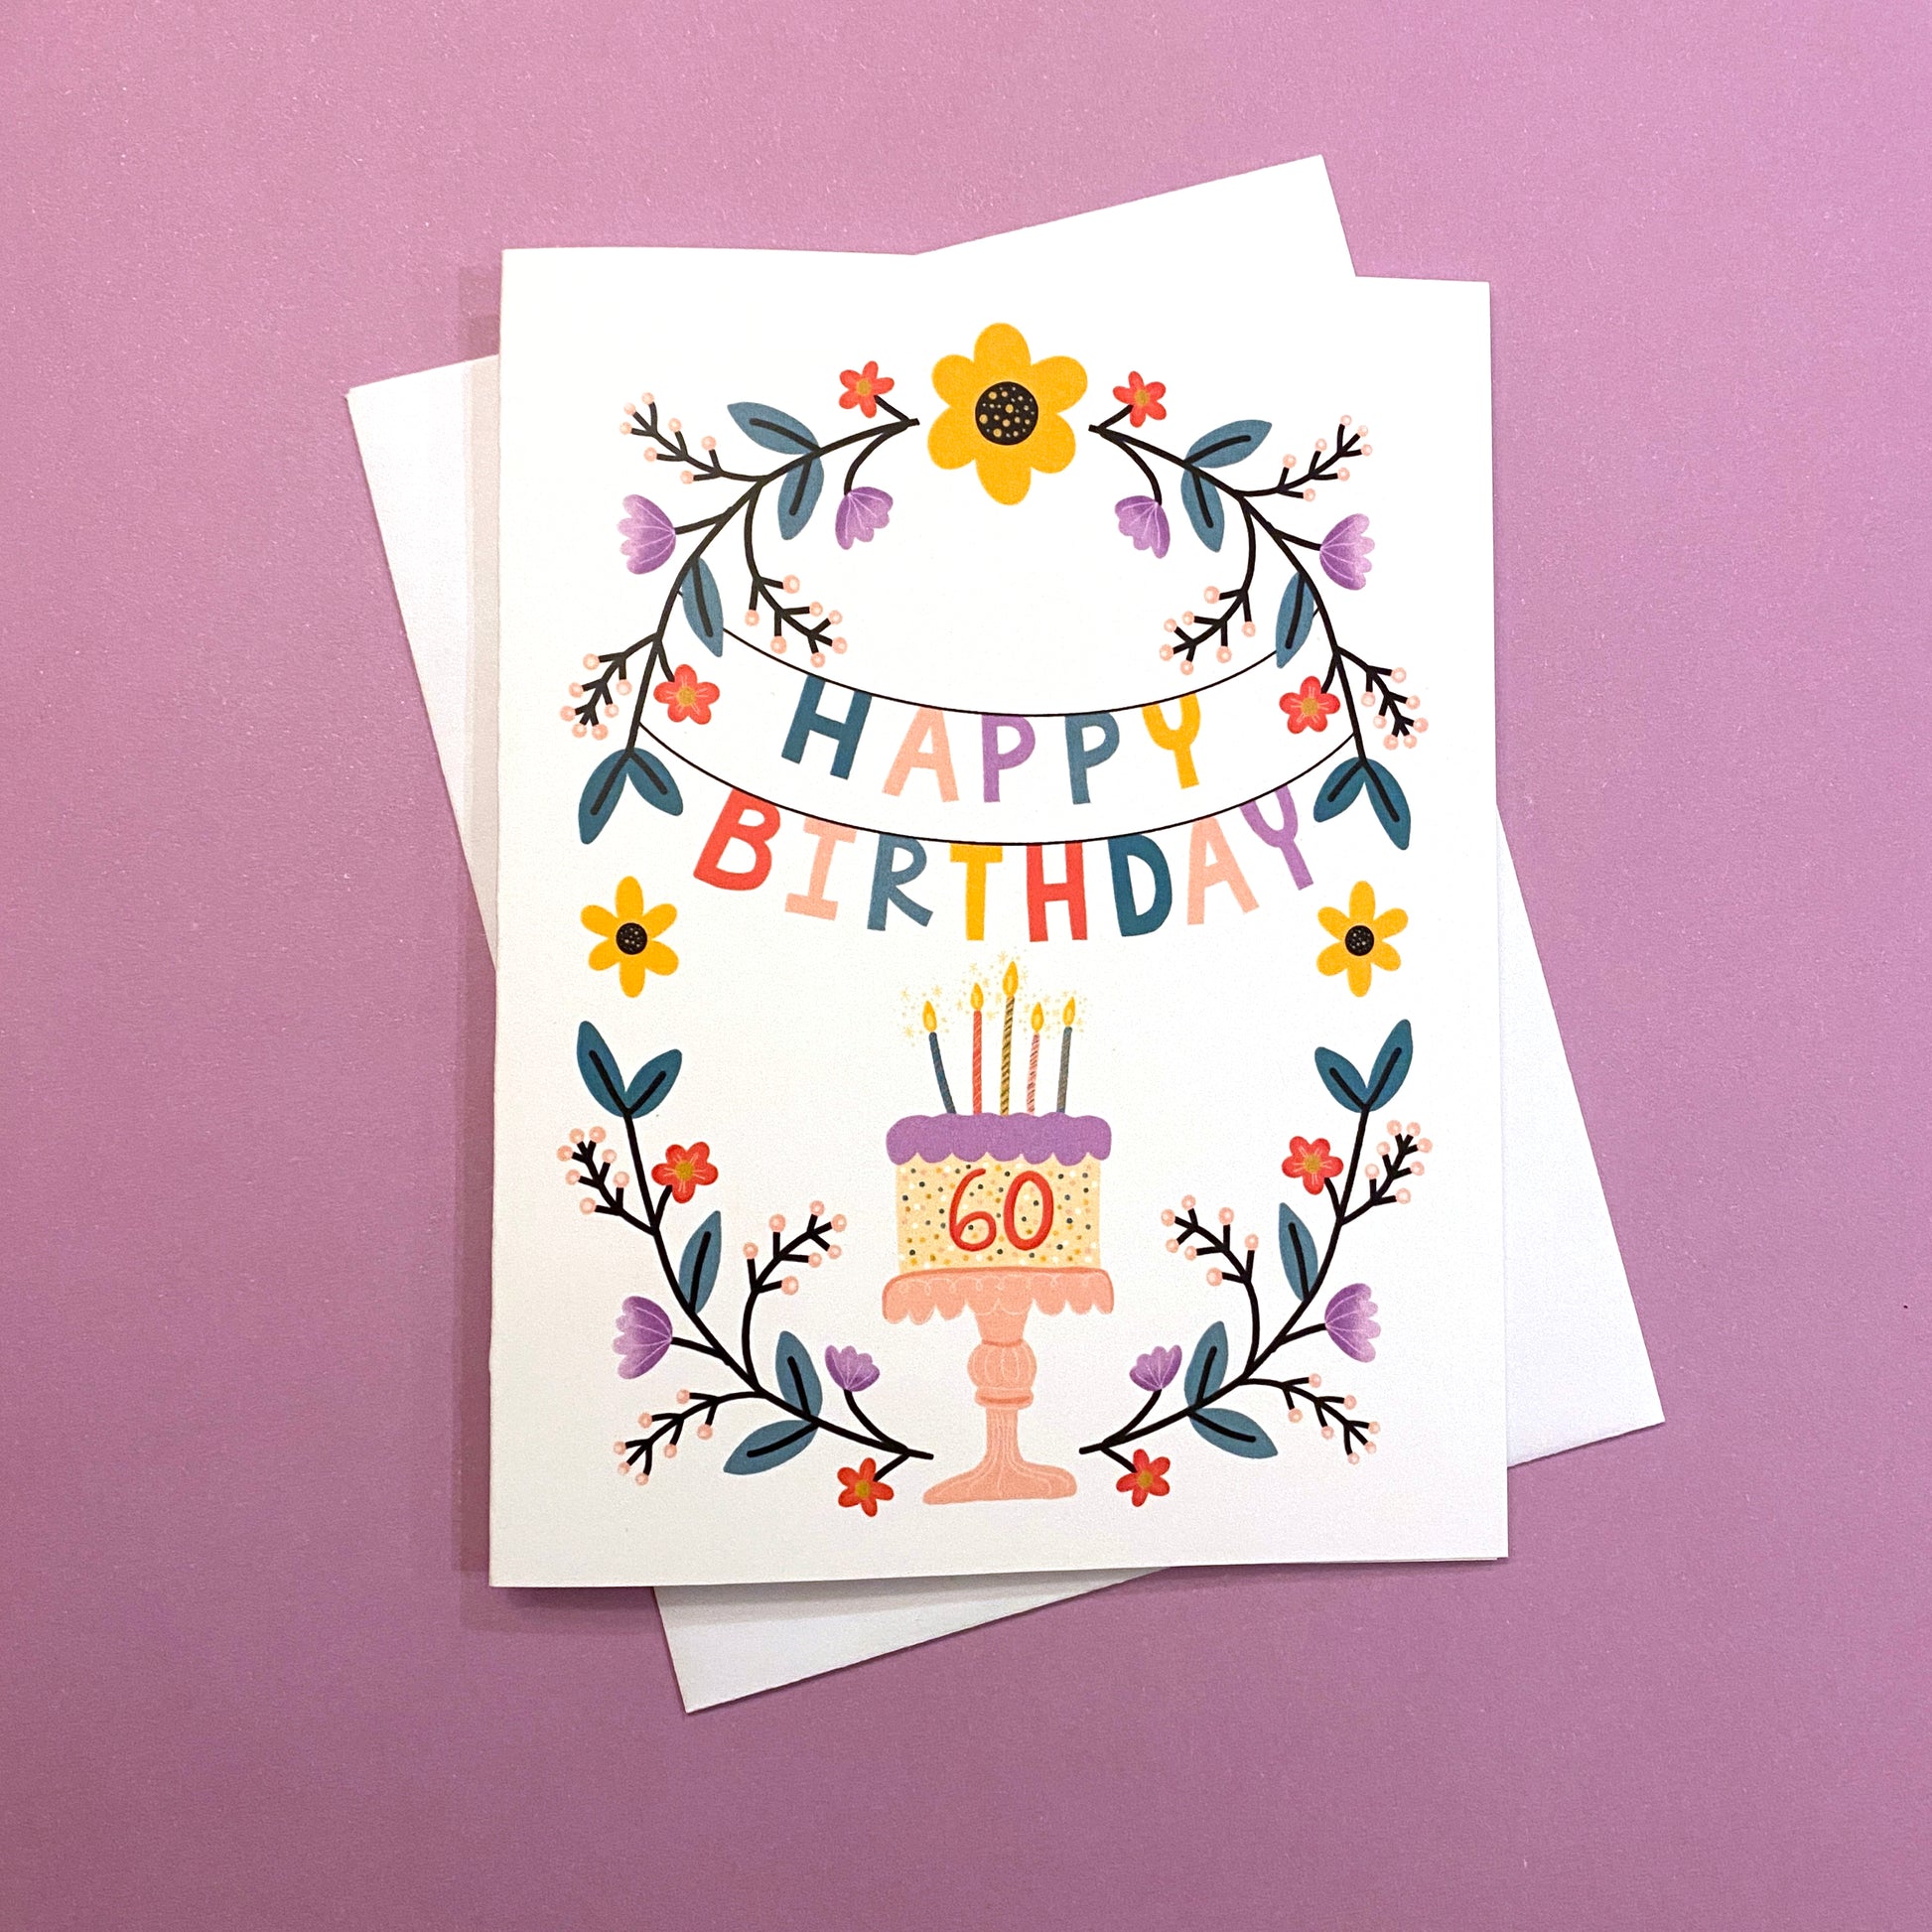 60th Birthday Card with beautiful floral design and birthday cake. Size A2 greeting card (4.25" x 5.5") with envelope, blank Inside. All cards are designed and Illustrated with love by me, Anna Fox, and are printed at my friendly neighborhood print shop in Denver, CO.